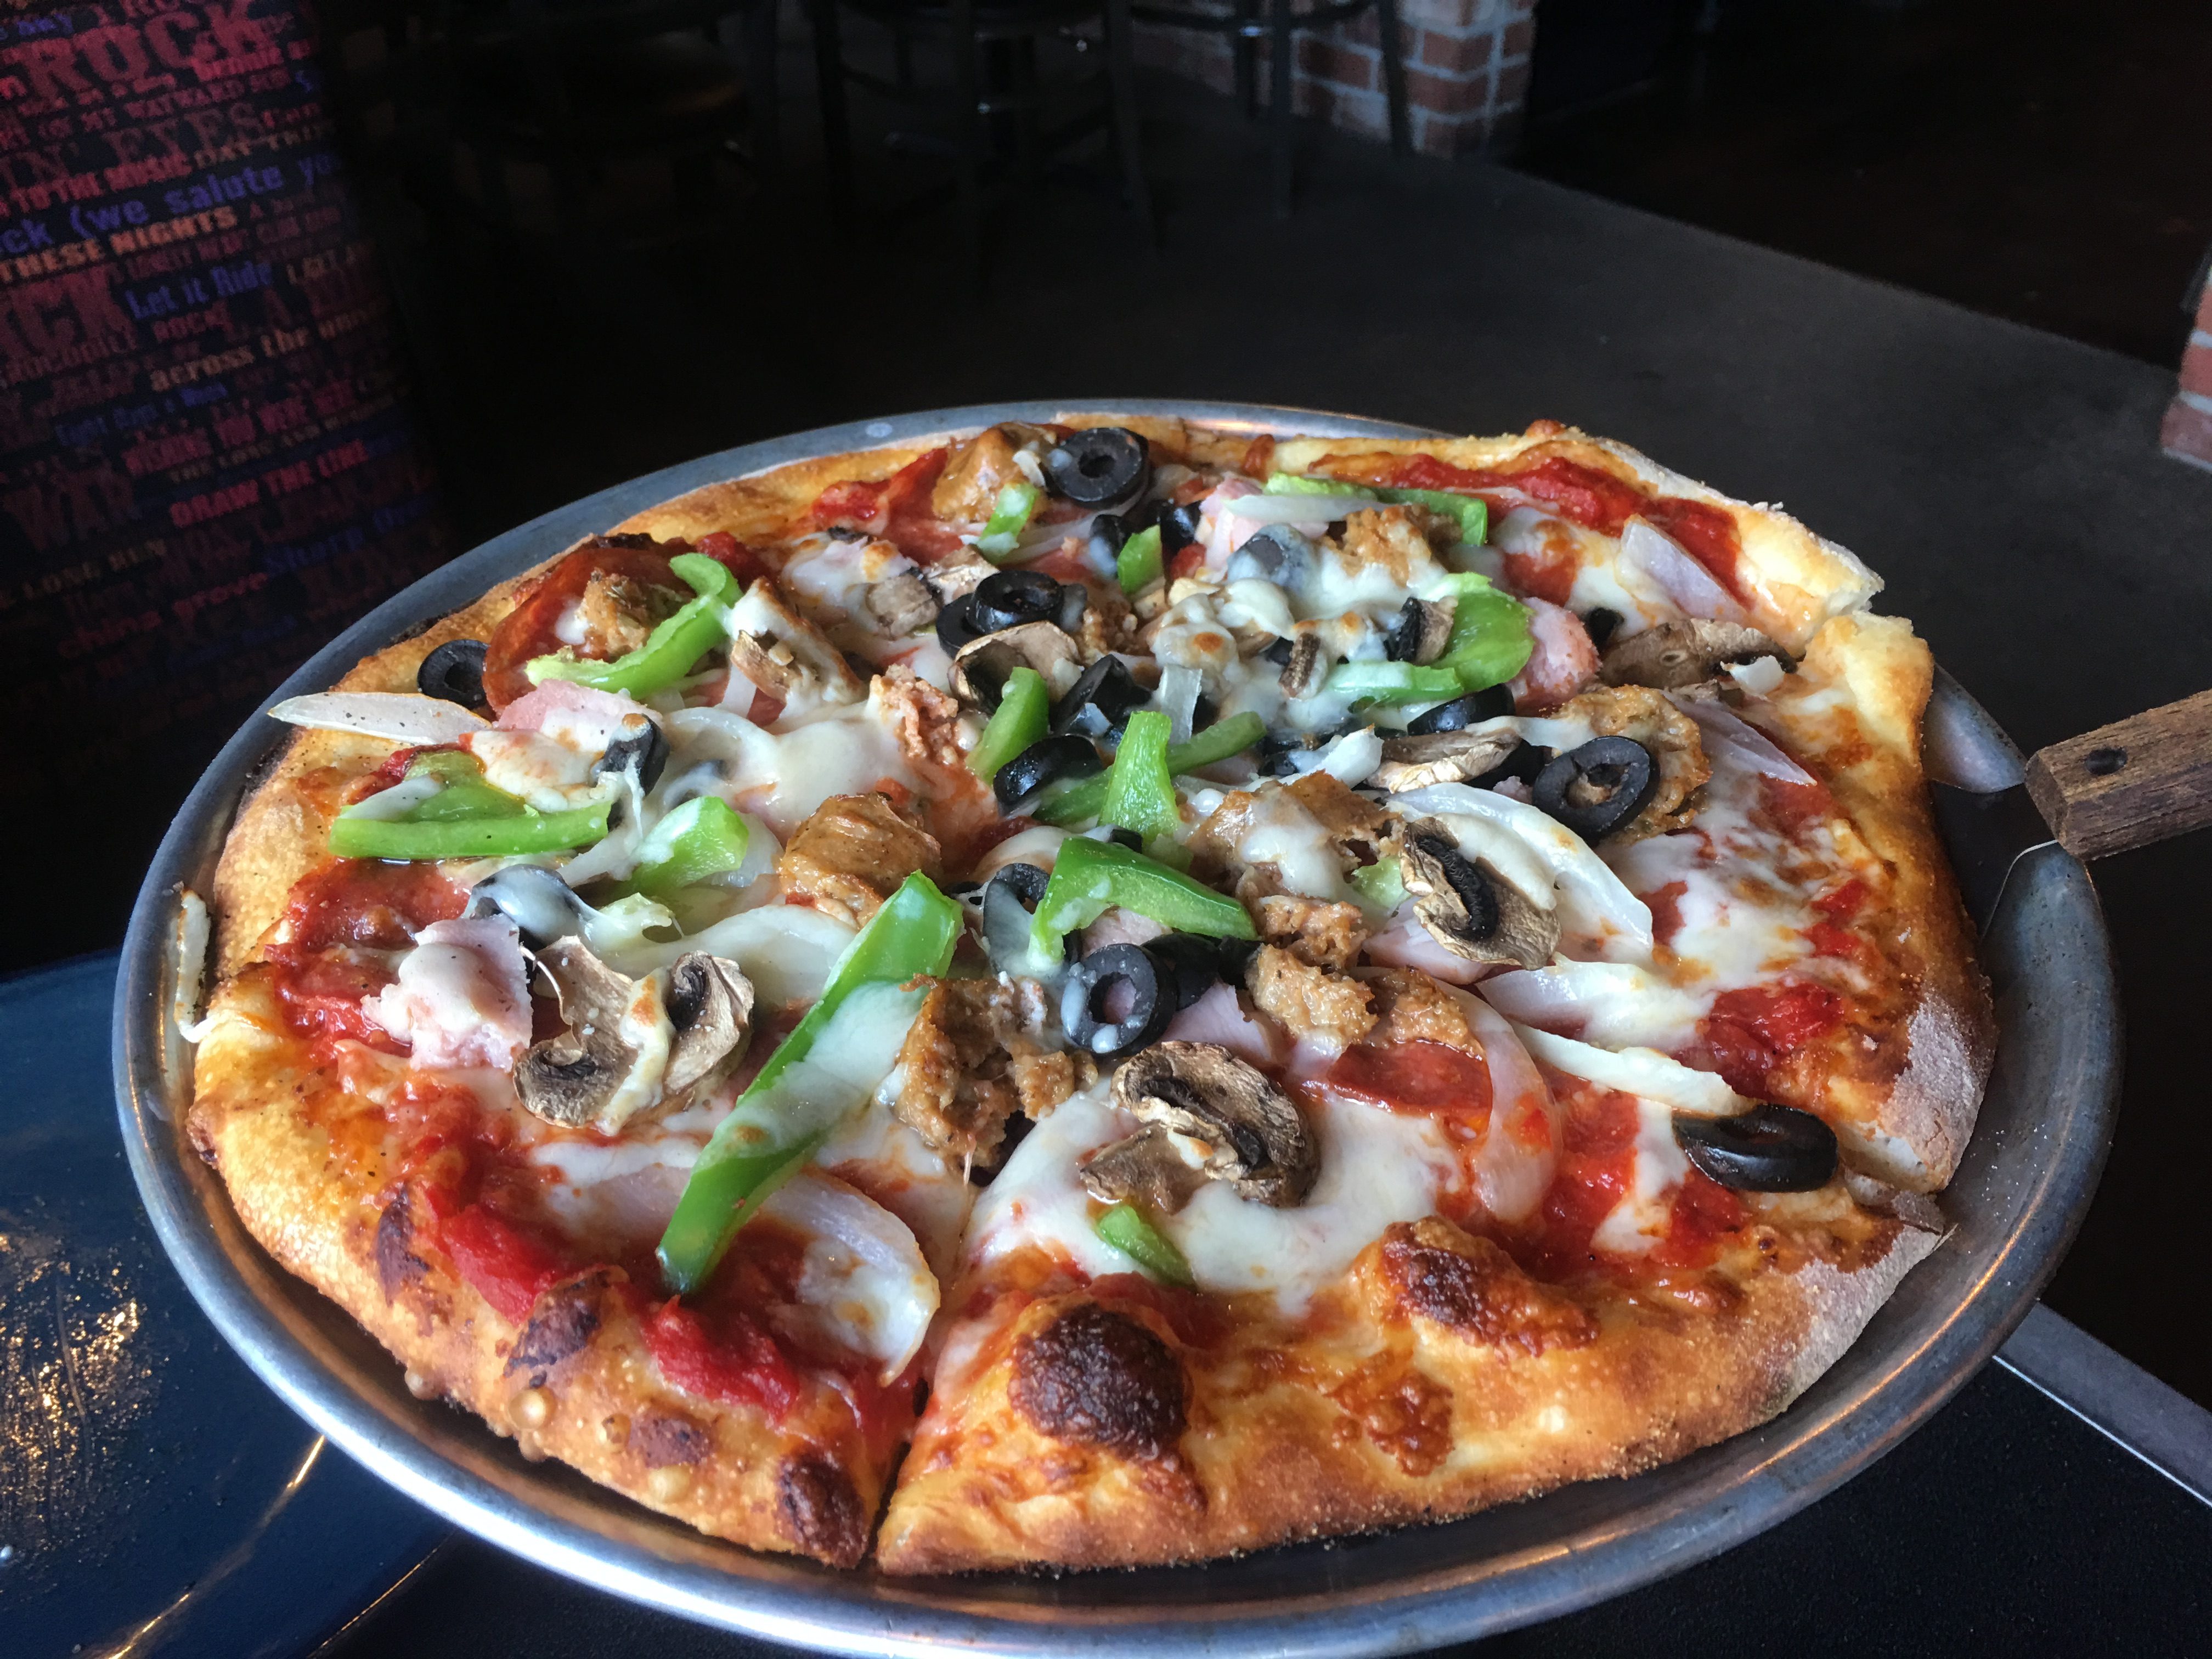 Local Eats & Places to Meet: The Rock Wood Fired Pizza - Lynnwood